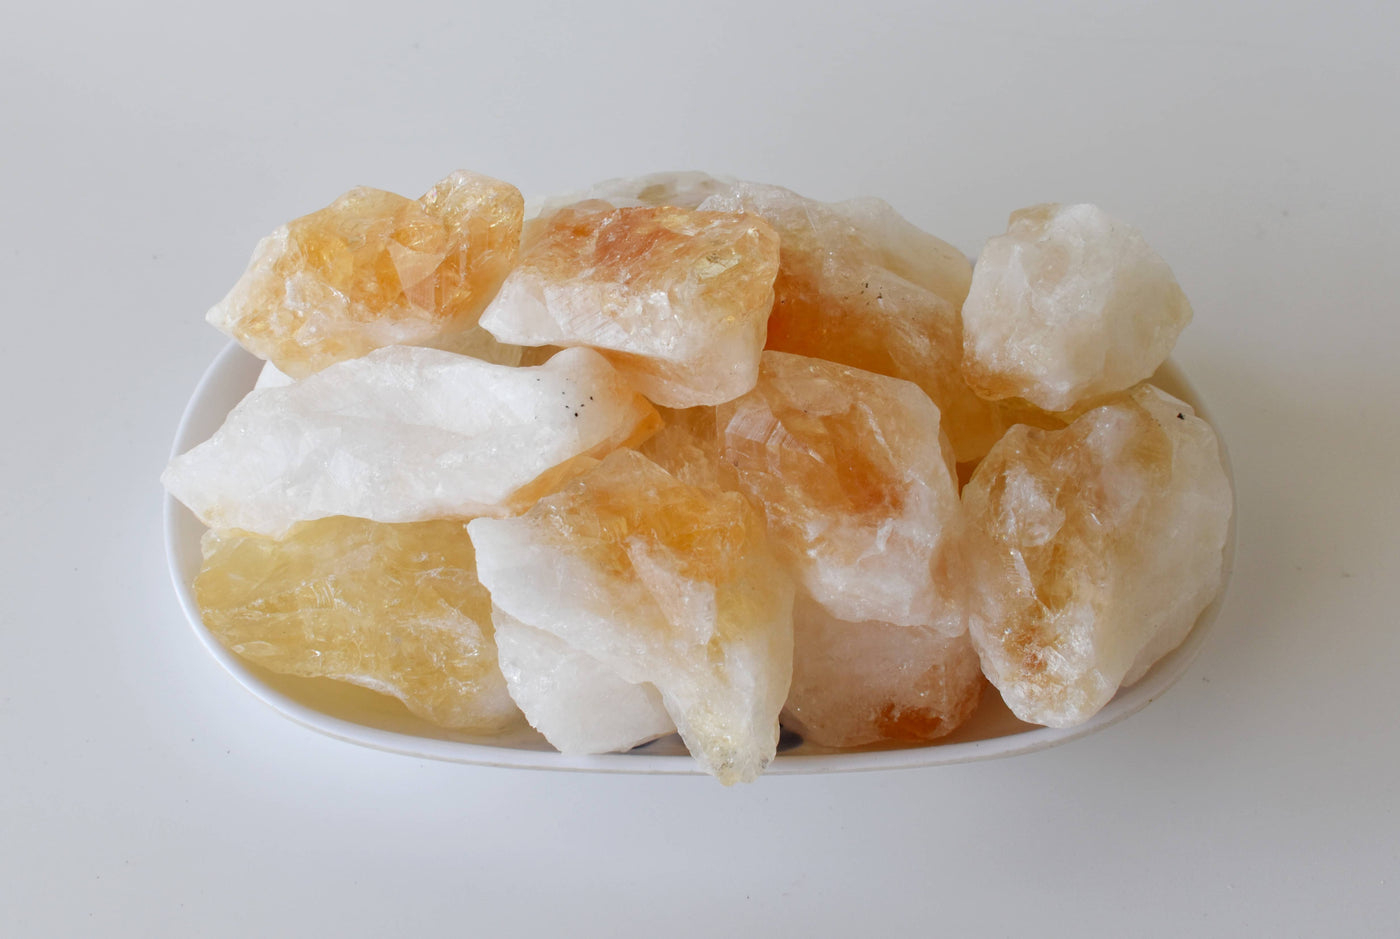 Natural Citrine Points, Natural Bulk Crystals (Stress Relief and Good Fortune)